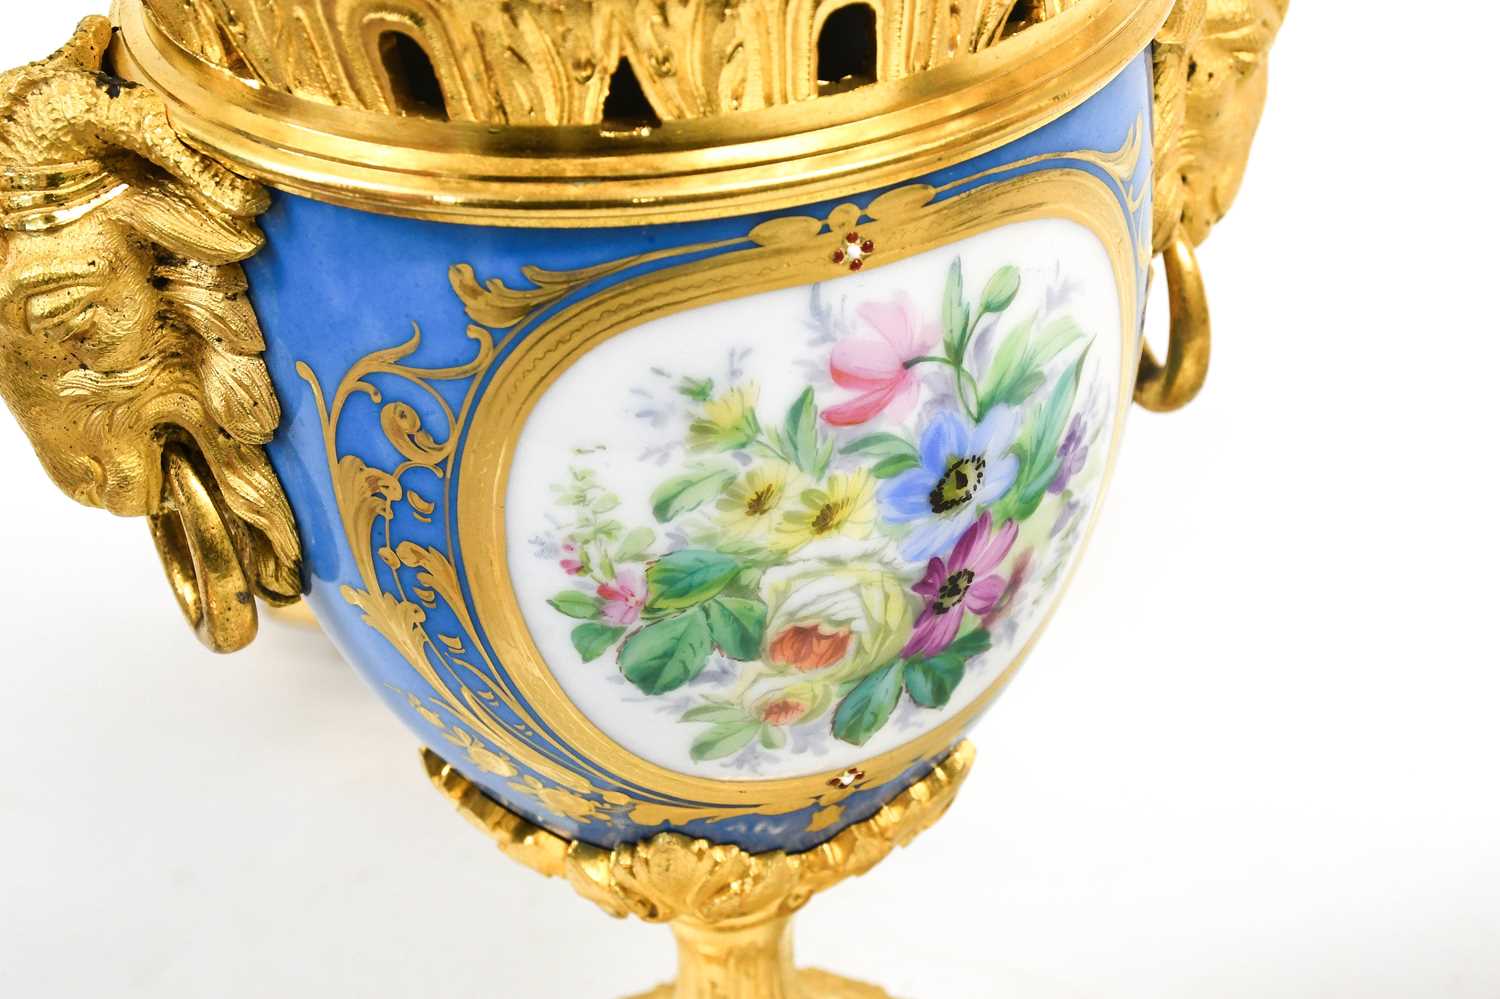 A Pair of Gilt-Metal-Mounted Sèvres-Style Porcelain Vases and Covers, 19th century, of urn shape - Bild 3 aus 3